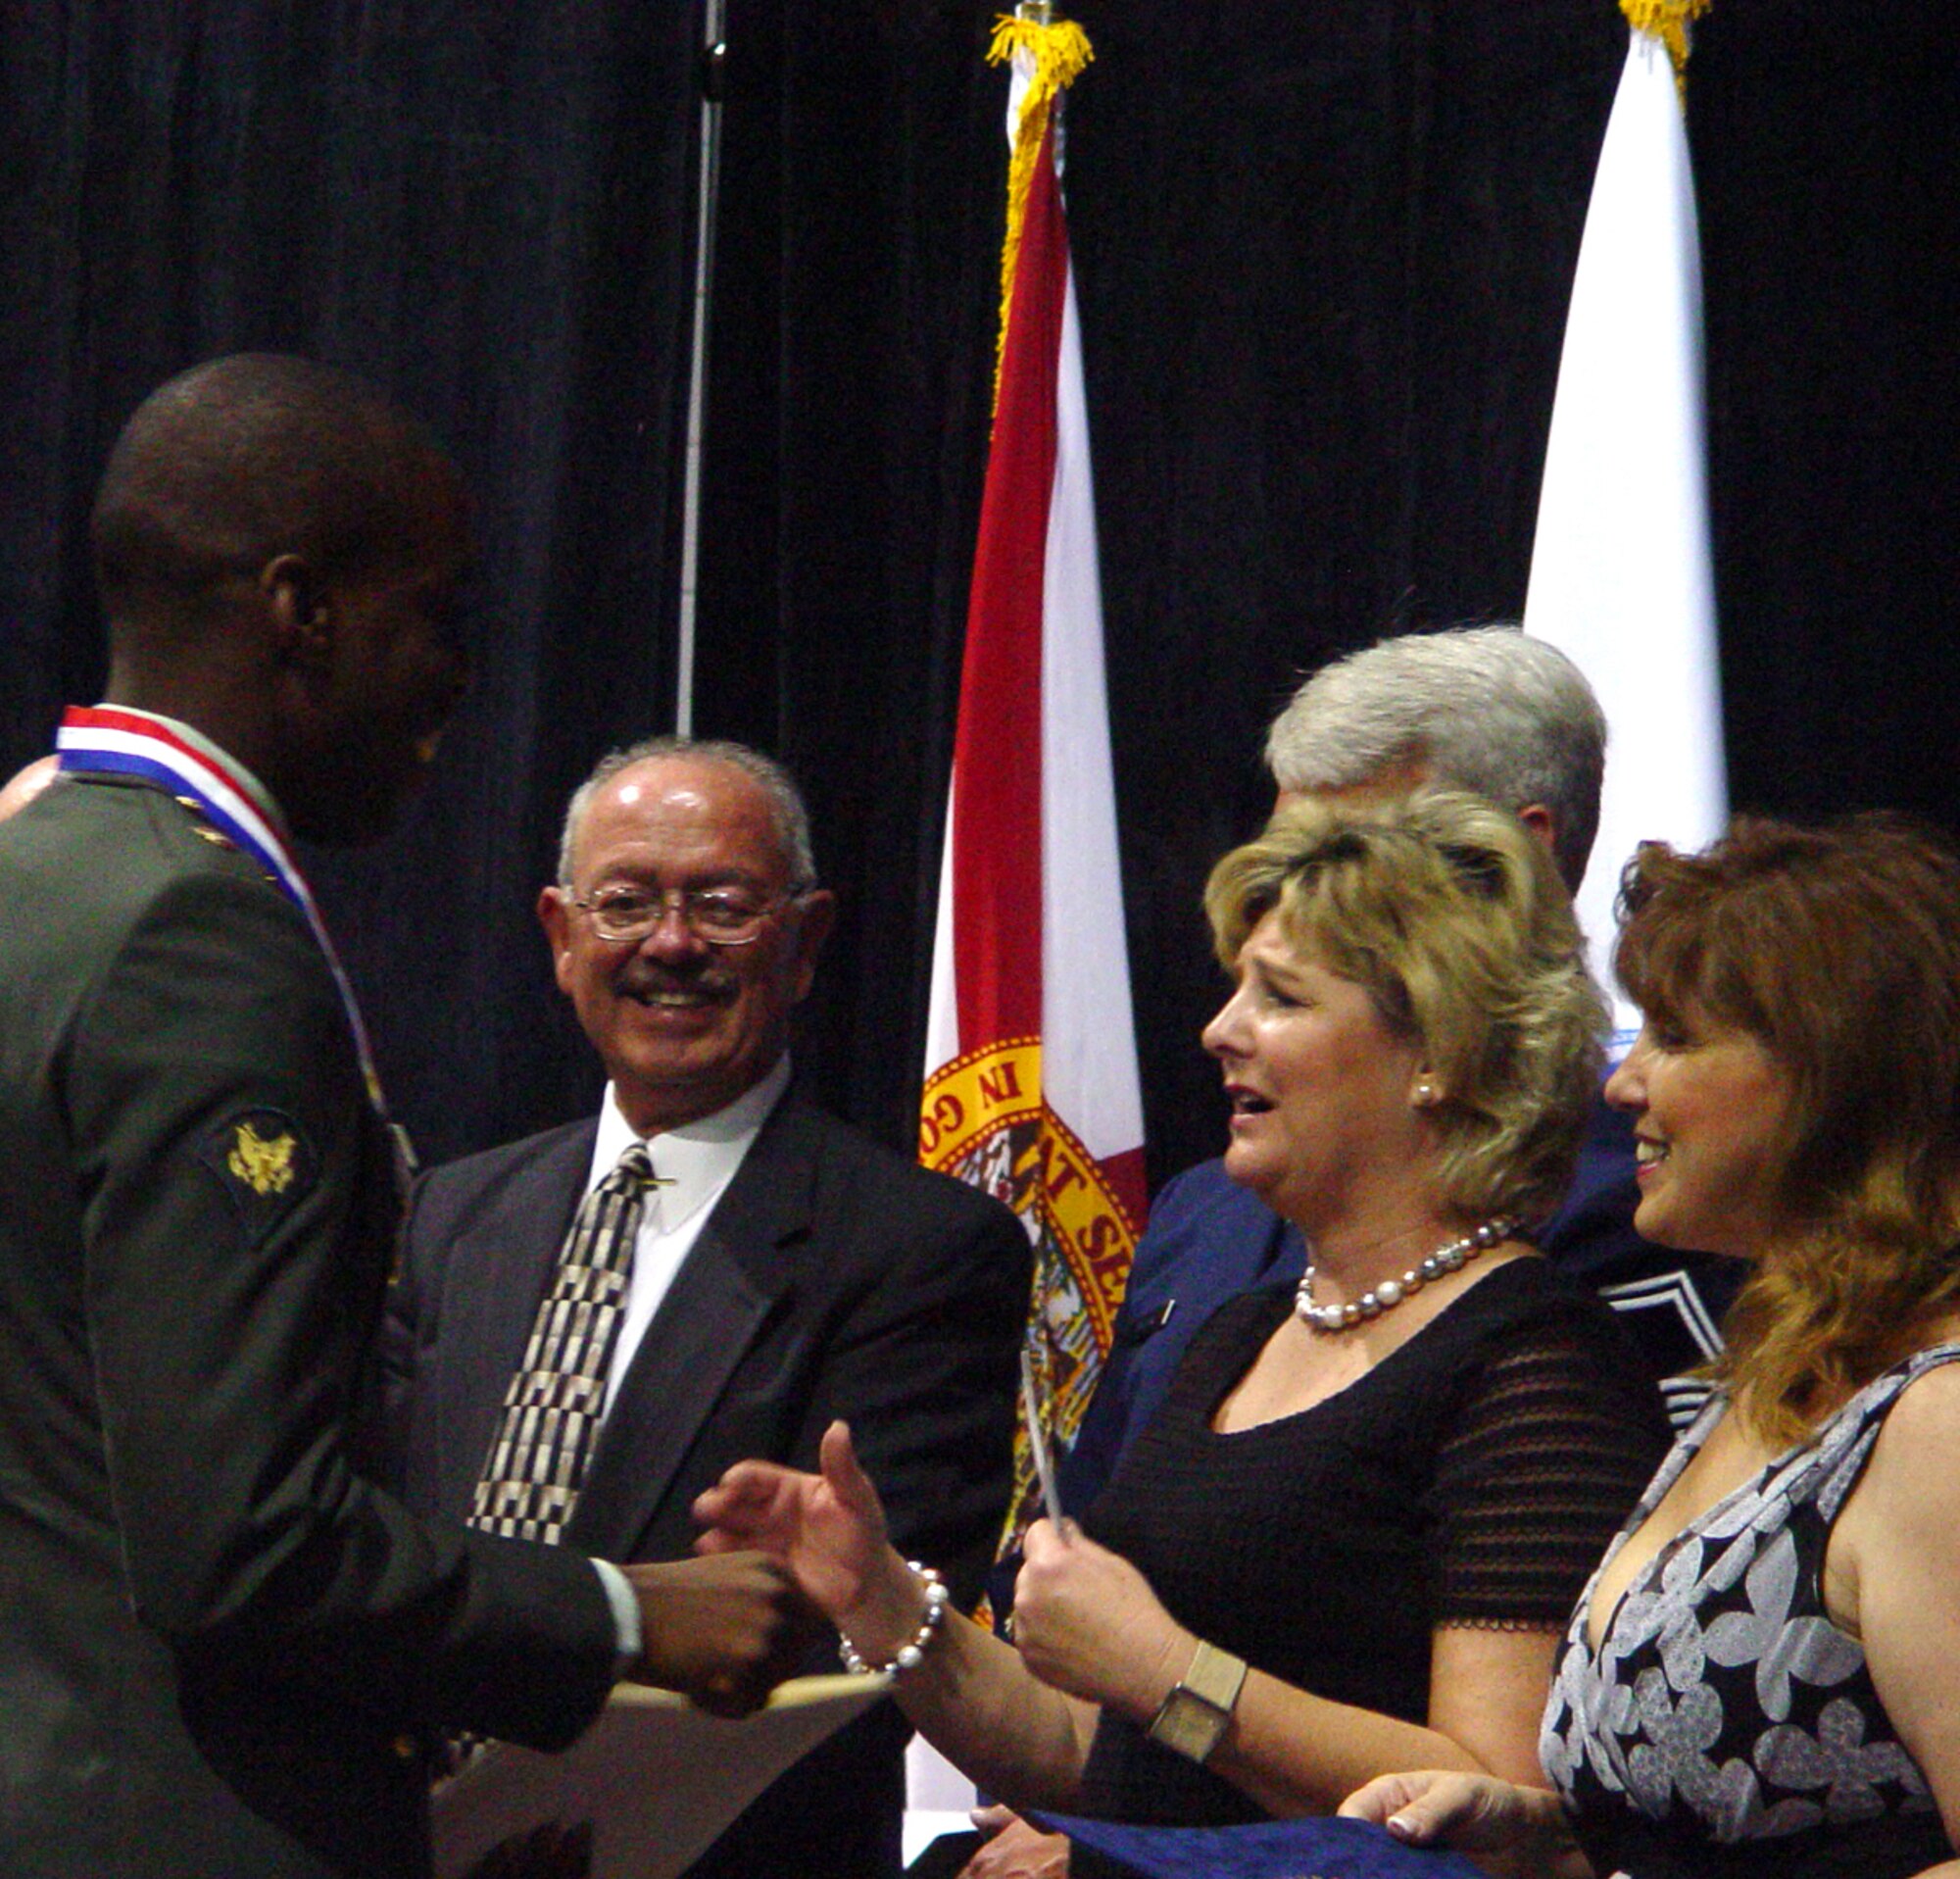 Specialist Paul Jolomi Agbeyegbe, 50th Area Support Group Soldier of the Year, receives an award from Sue Newman, Homestead/Florida City Military Affairs Committee.  (Air Force photo by Lisa Macias)